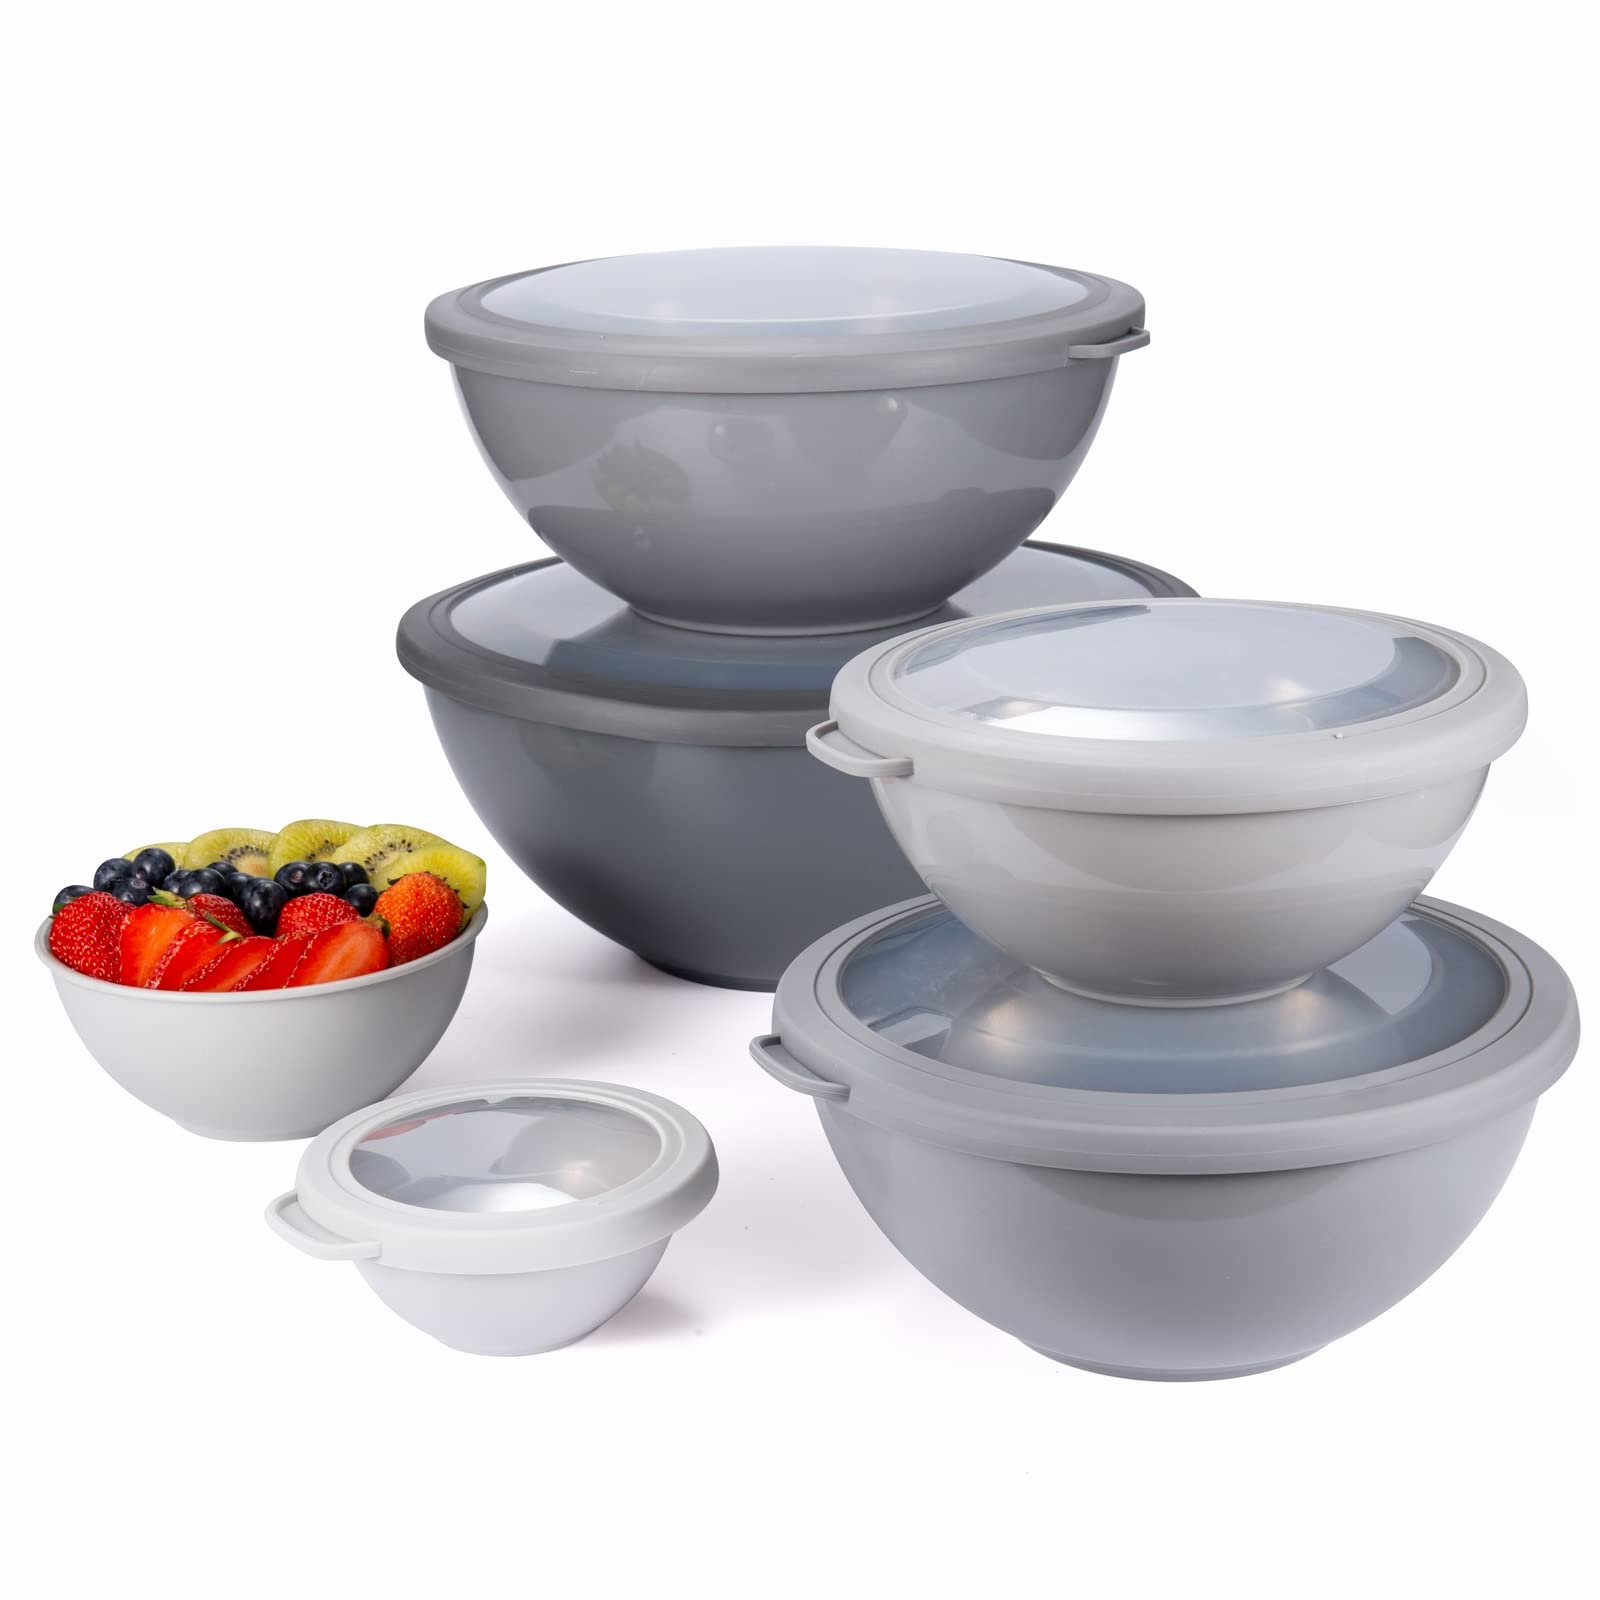 COOK WITH COLOR Mixing Bowls Set with TPR Lids - 12 Piece Plastic Nesting Bowls Set includes 6 Prep Bowls and 6 Lids, Microwave Safe (Grey)